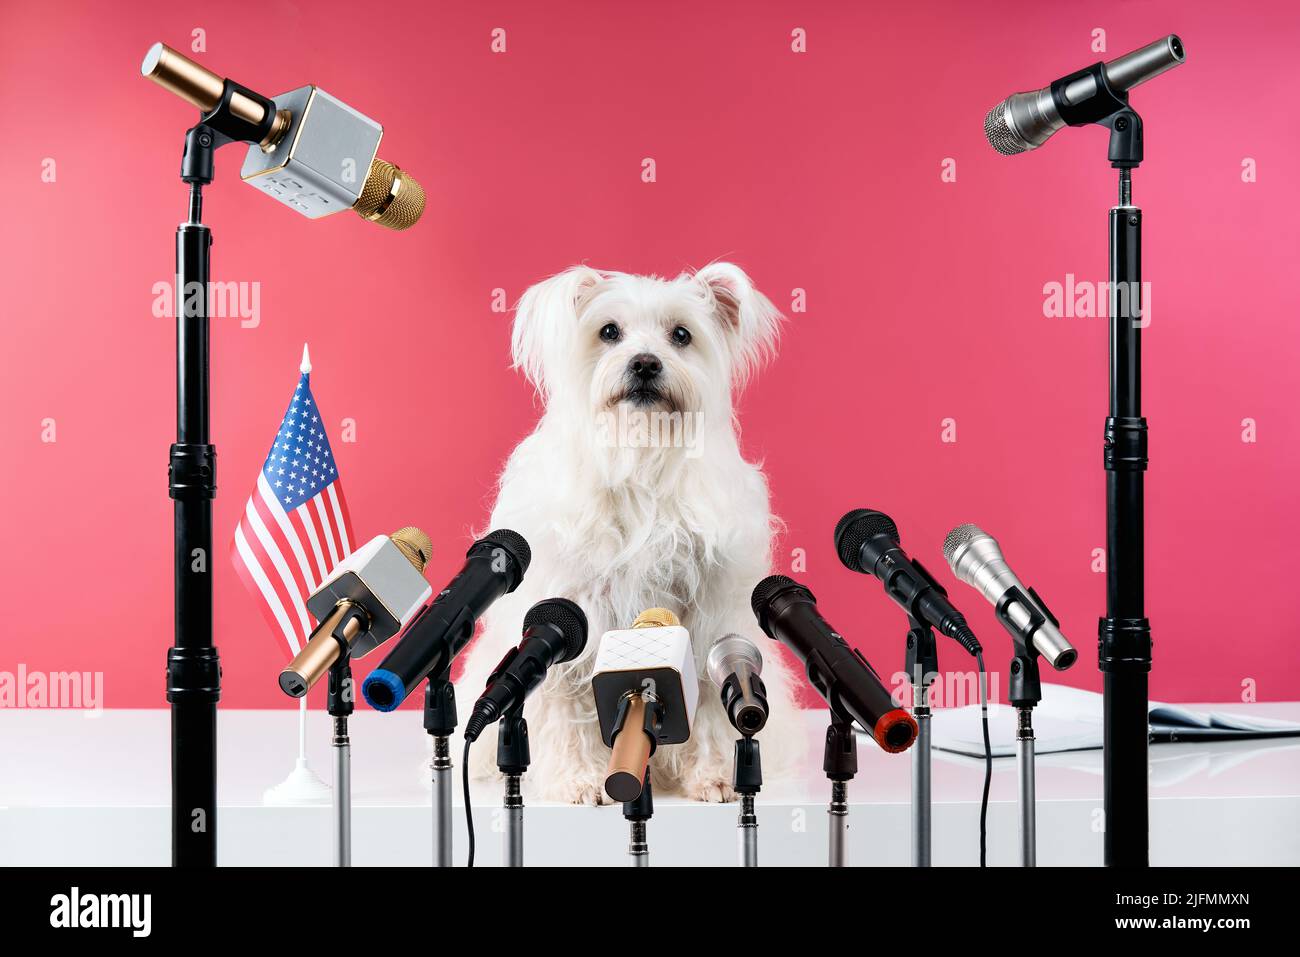 Adorable white fluffy dog speaker holds press conference with set of different microphones over pink background. Animals, funny concept Stock Photo